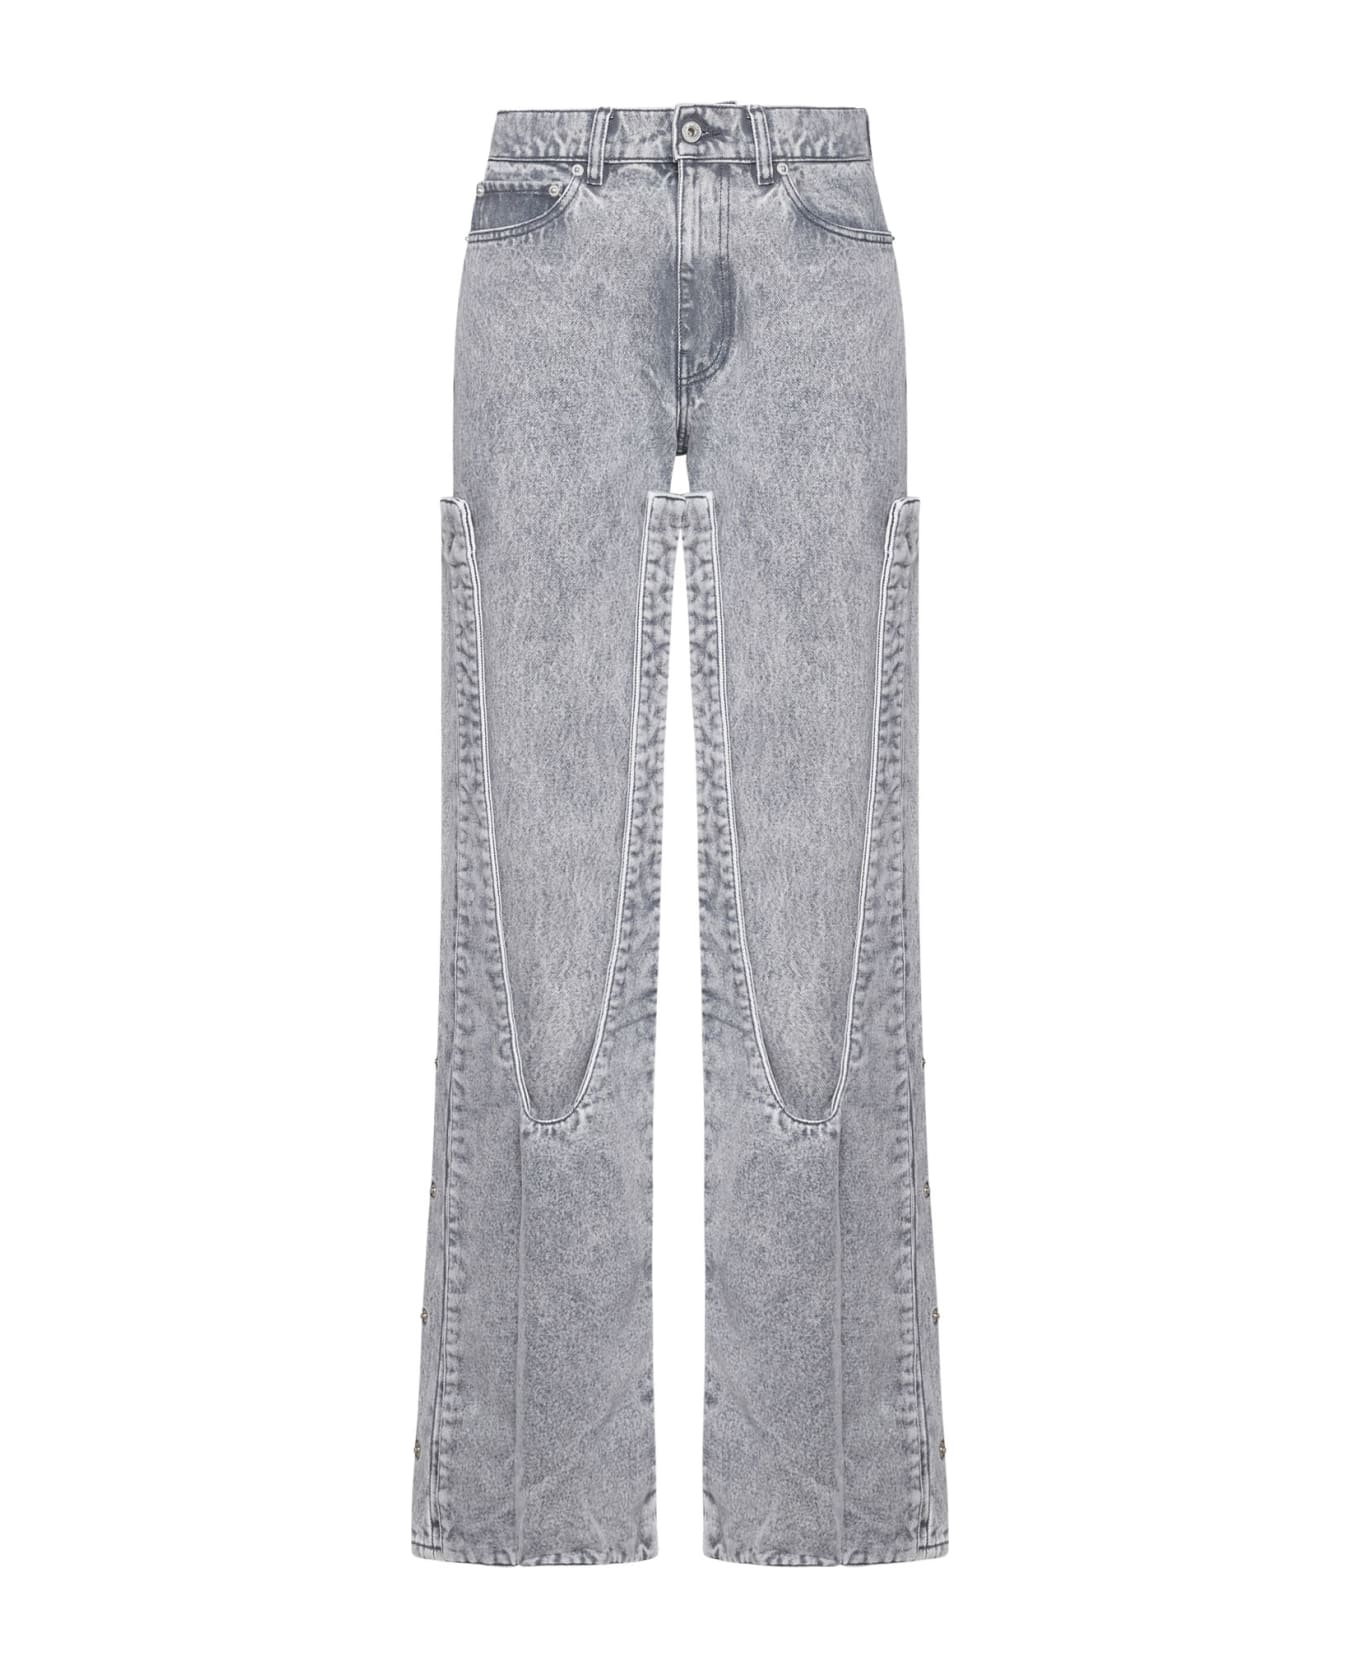 Y/Project Jeans - Vintage grey ボトムス